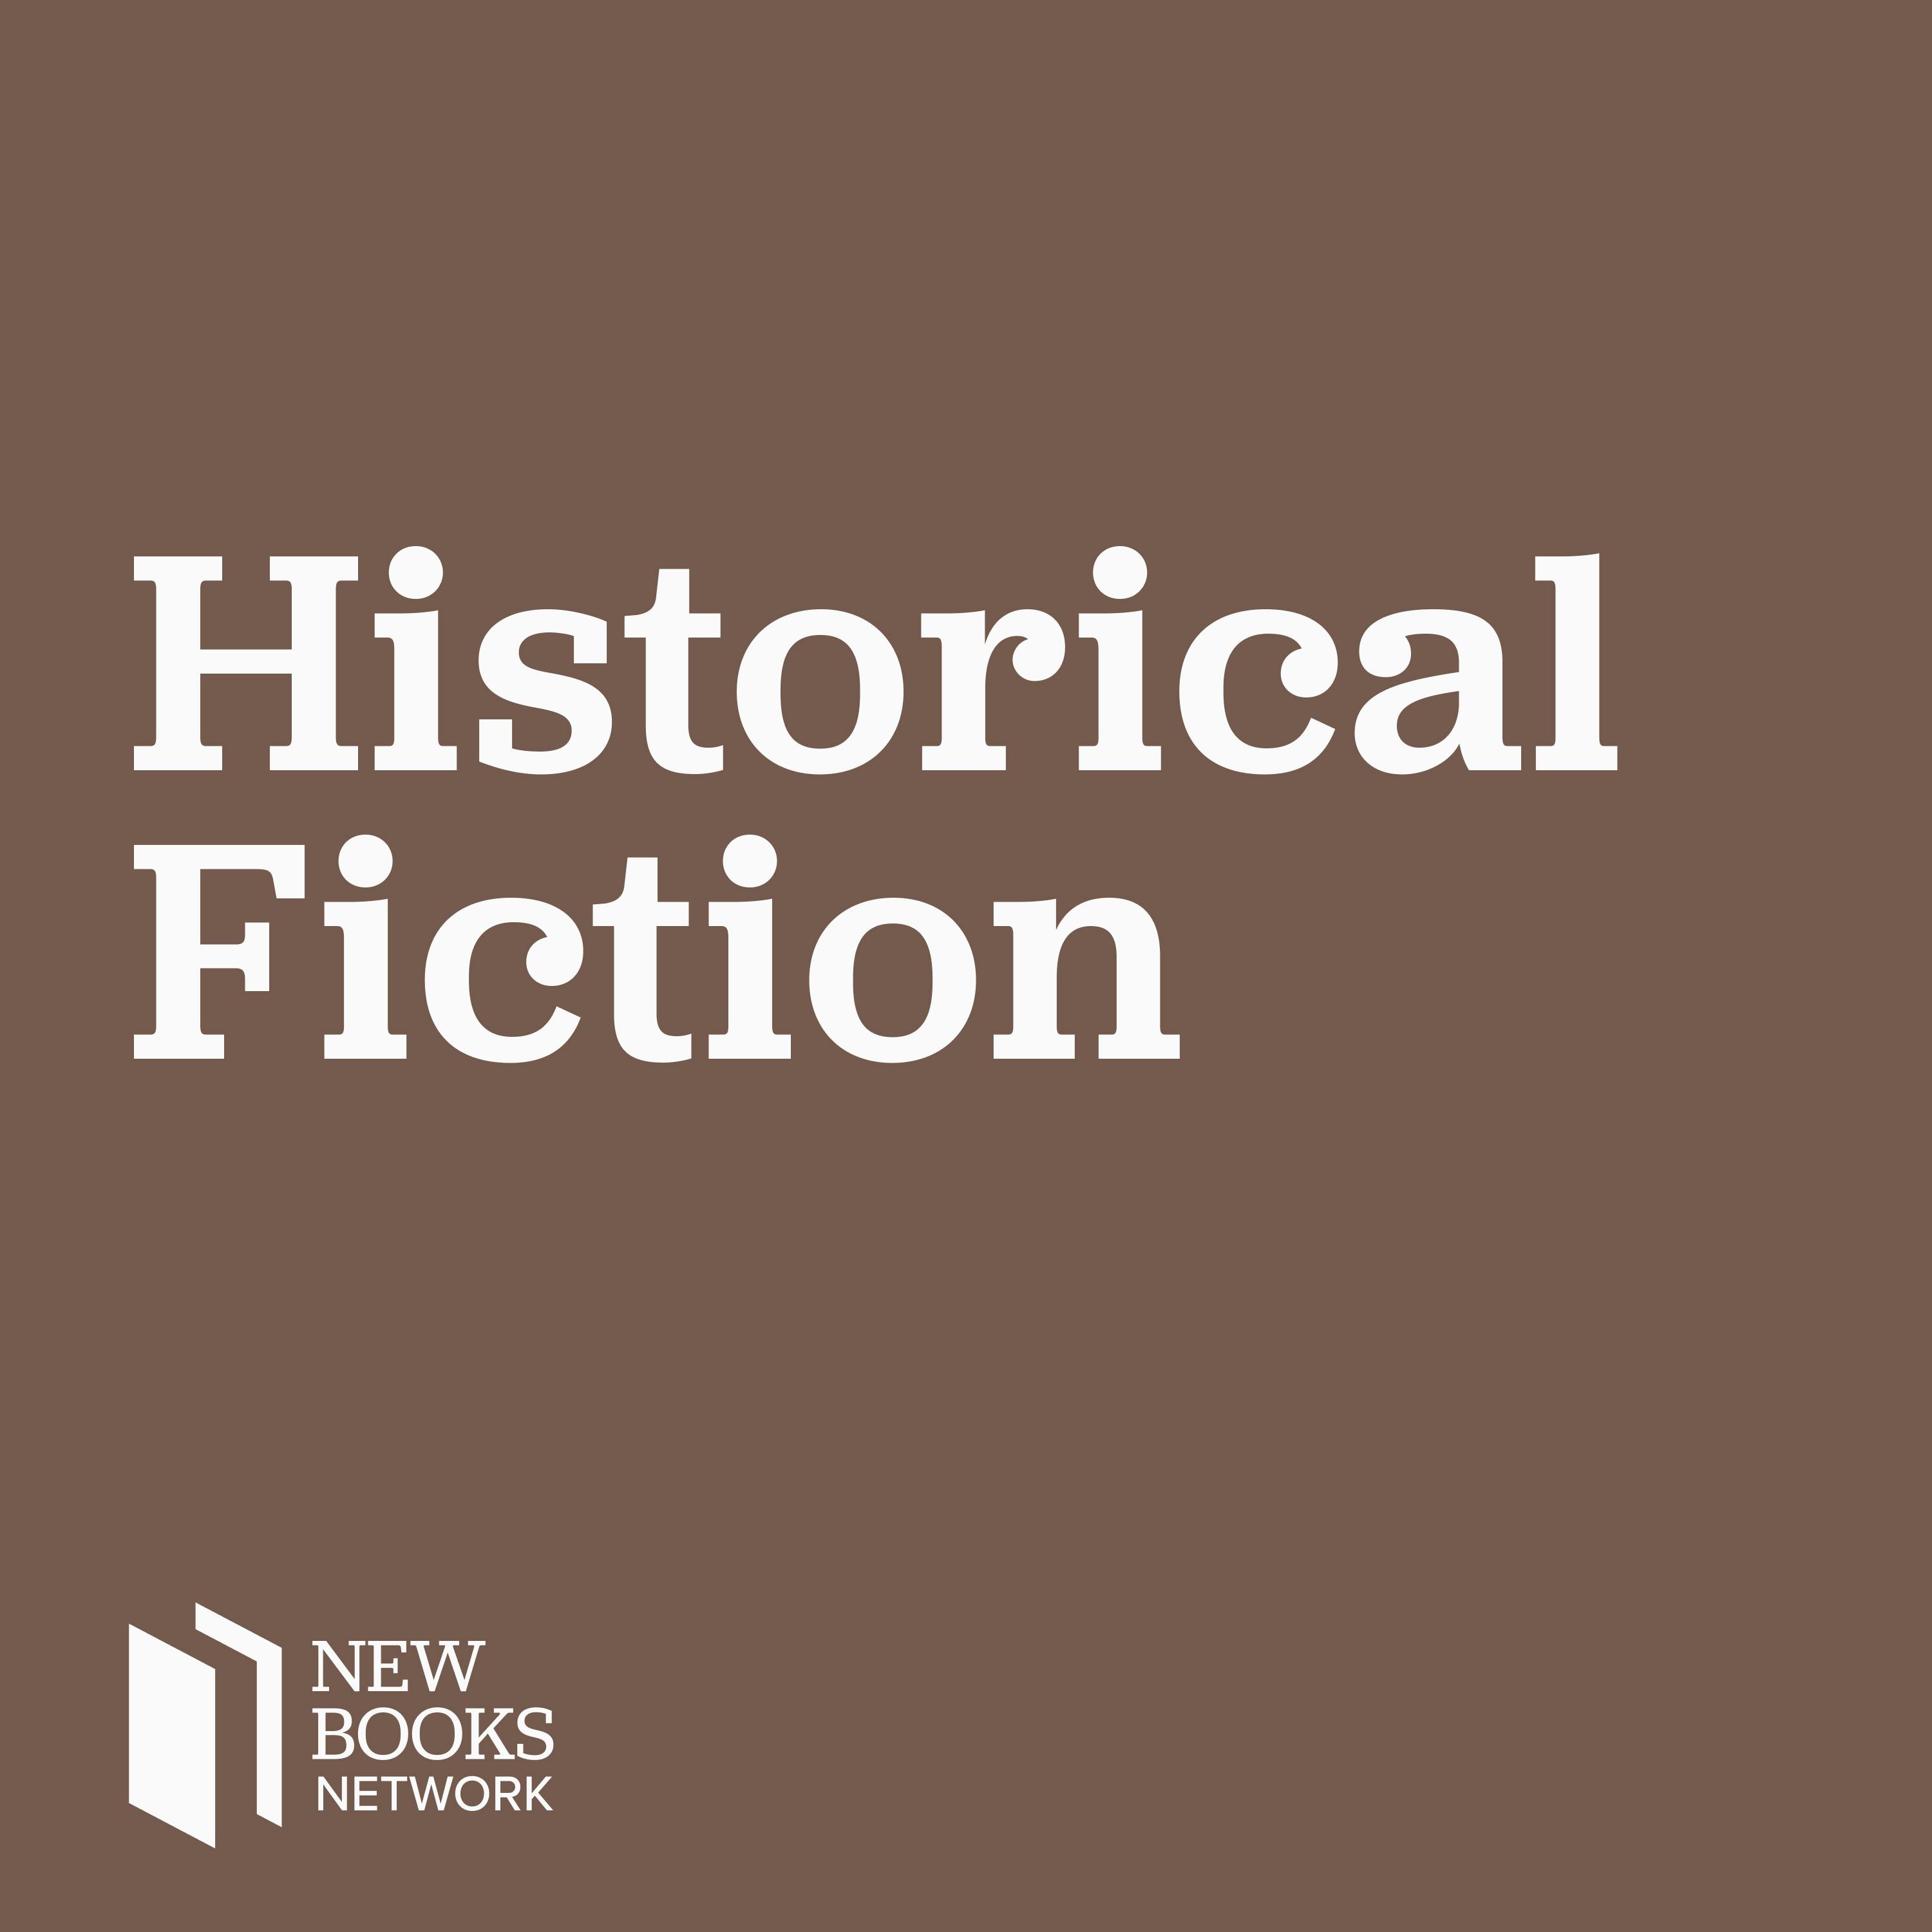 New Books in Historical Fiction